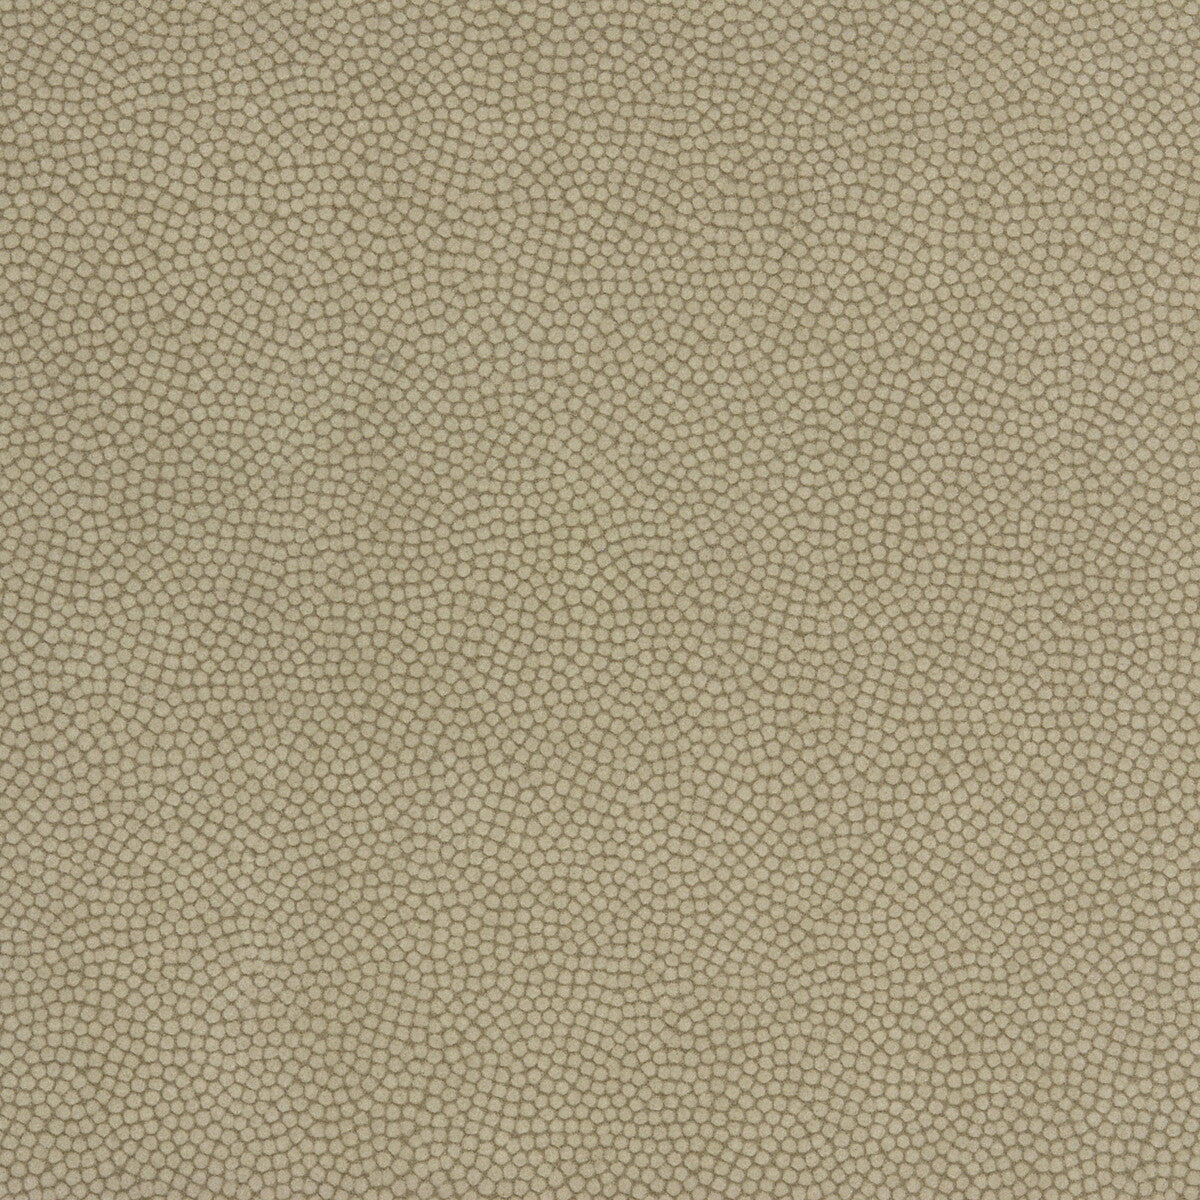 Beautymark fabric in greystone color - pattern BEAUTYMARK.106.0 - by Kravet Couture